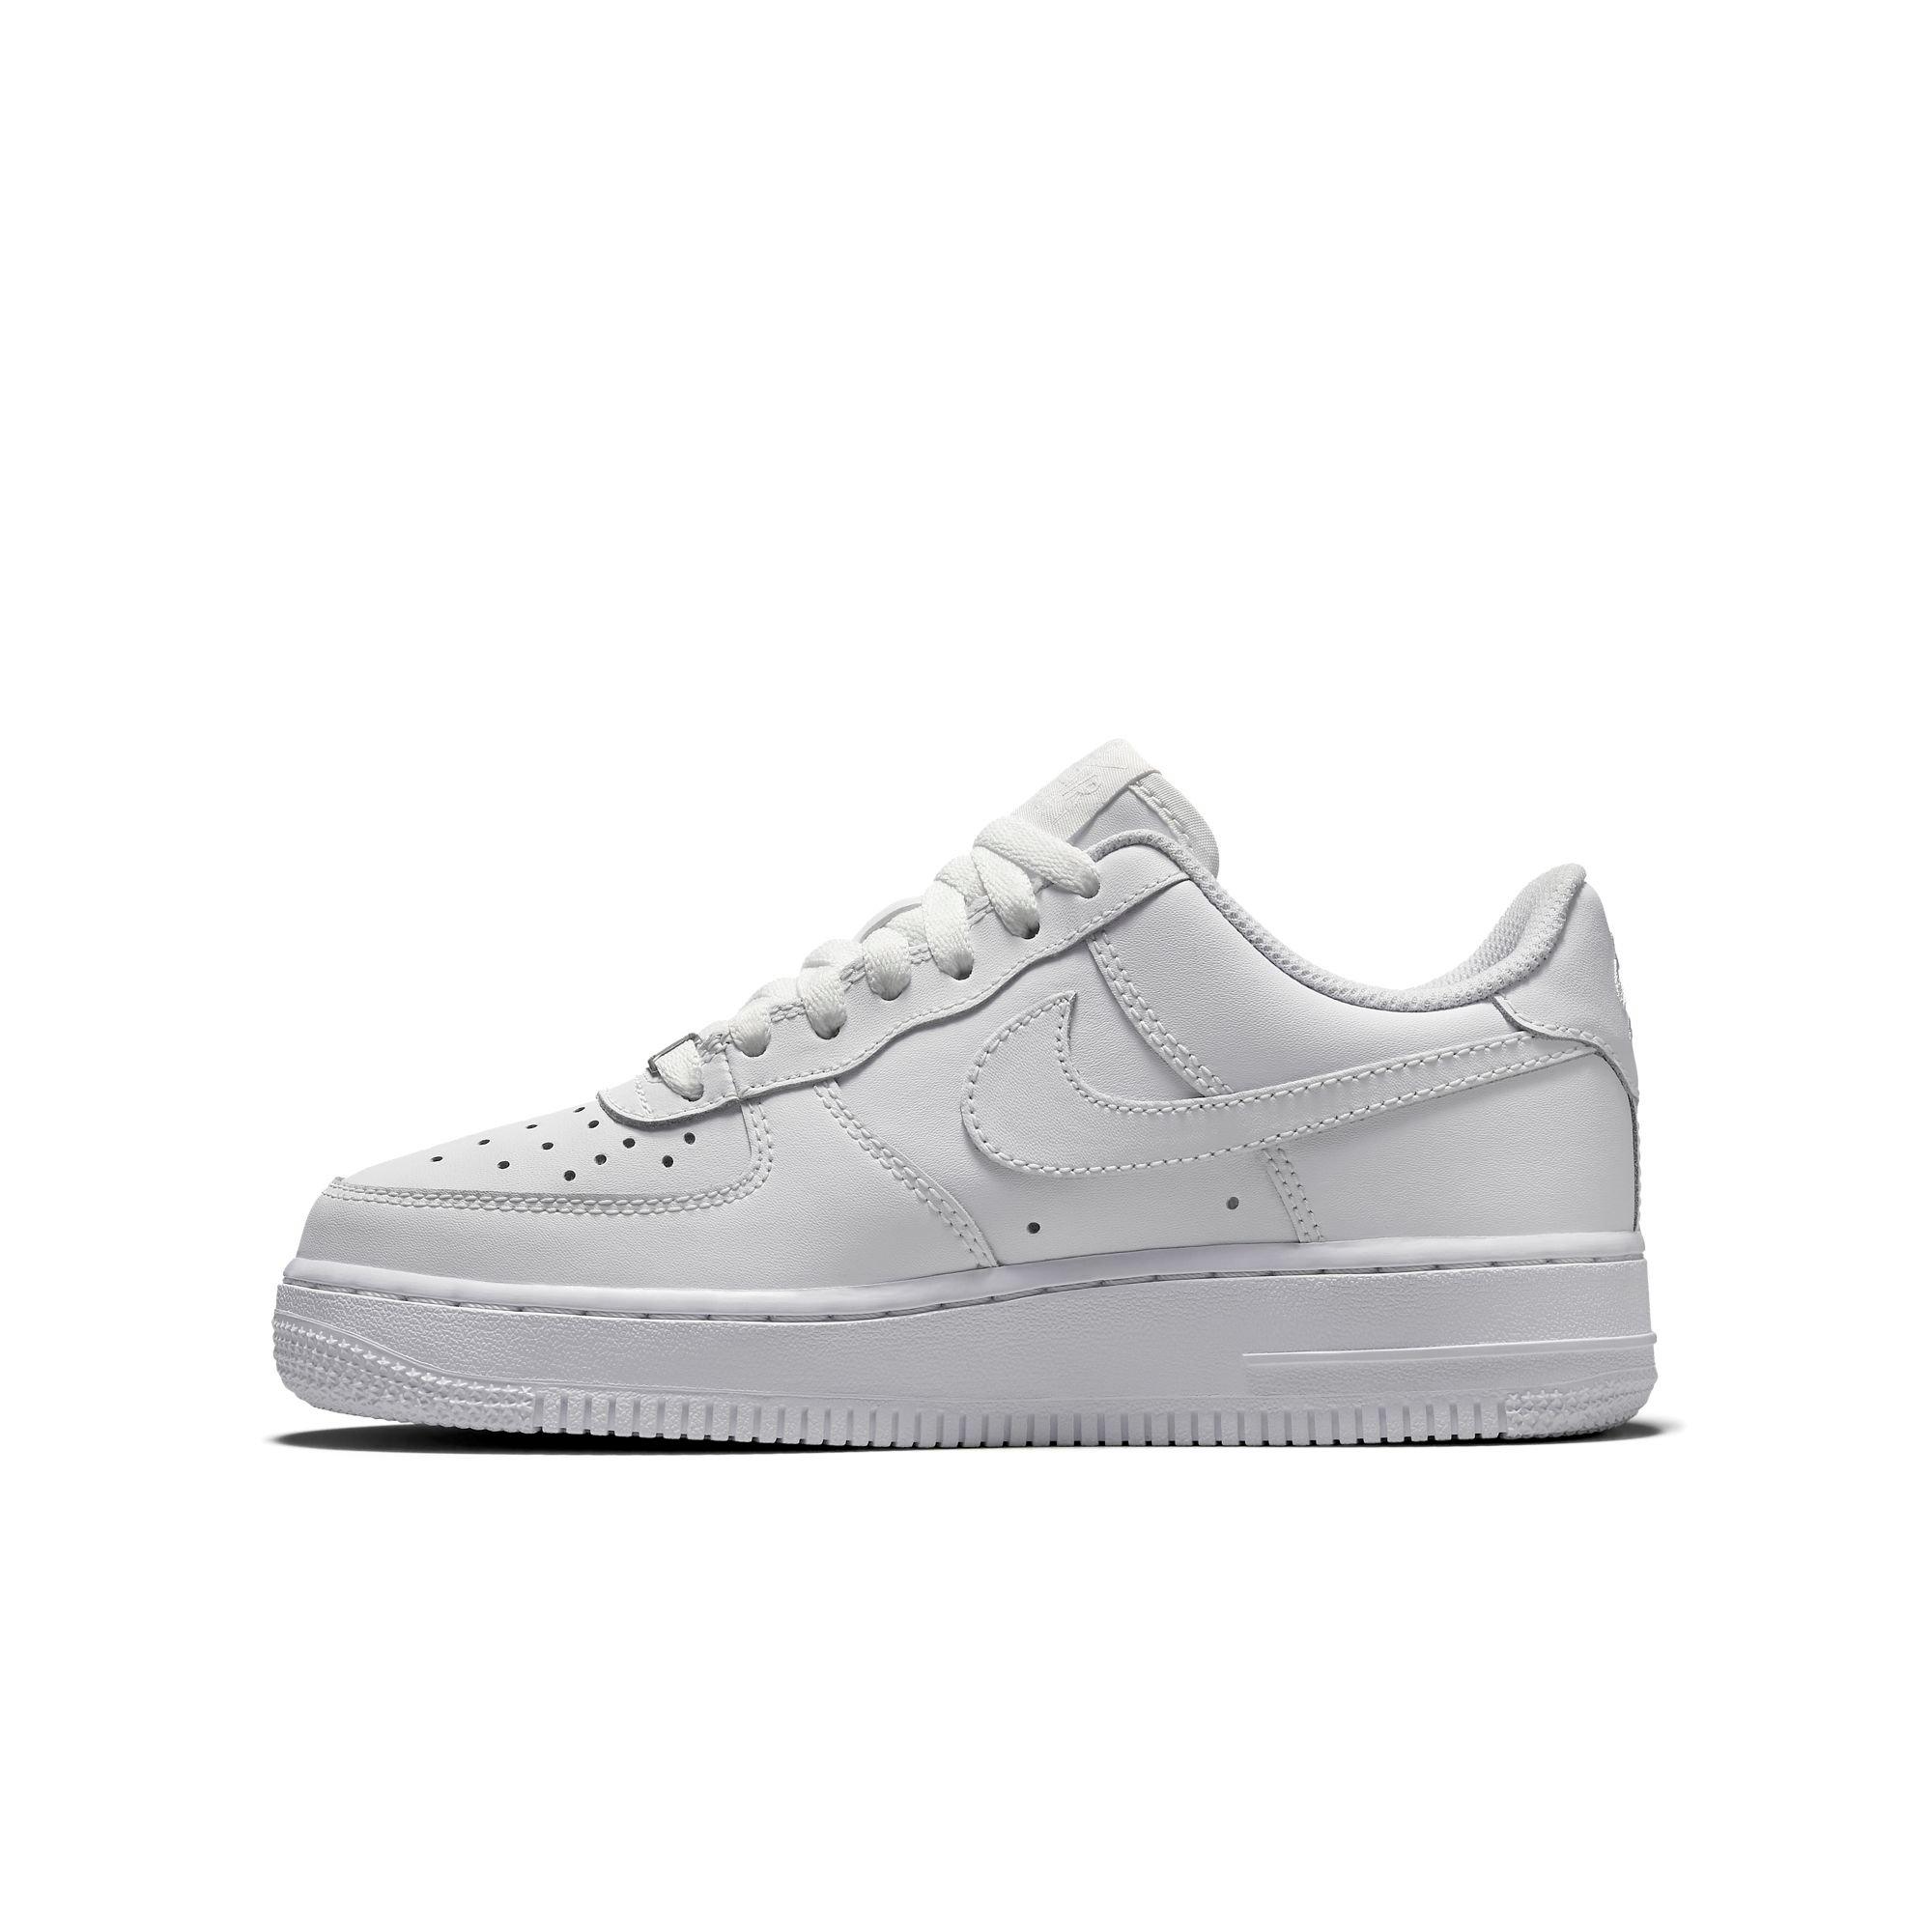 nike air force 1 white size 4.5